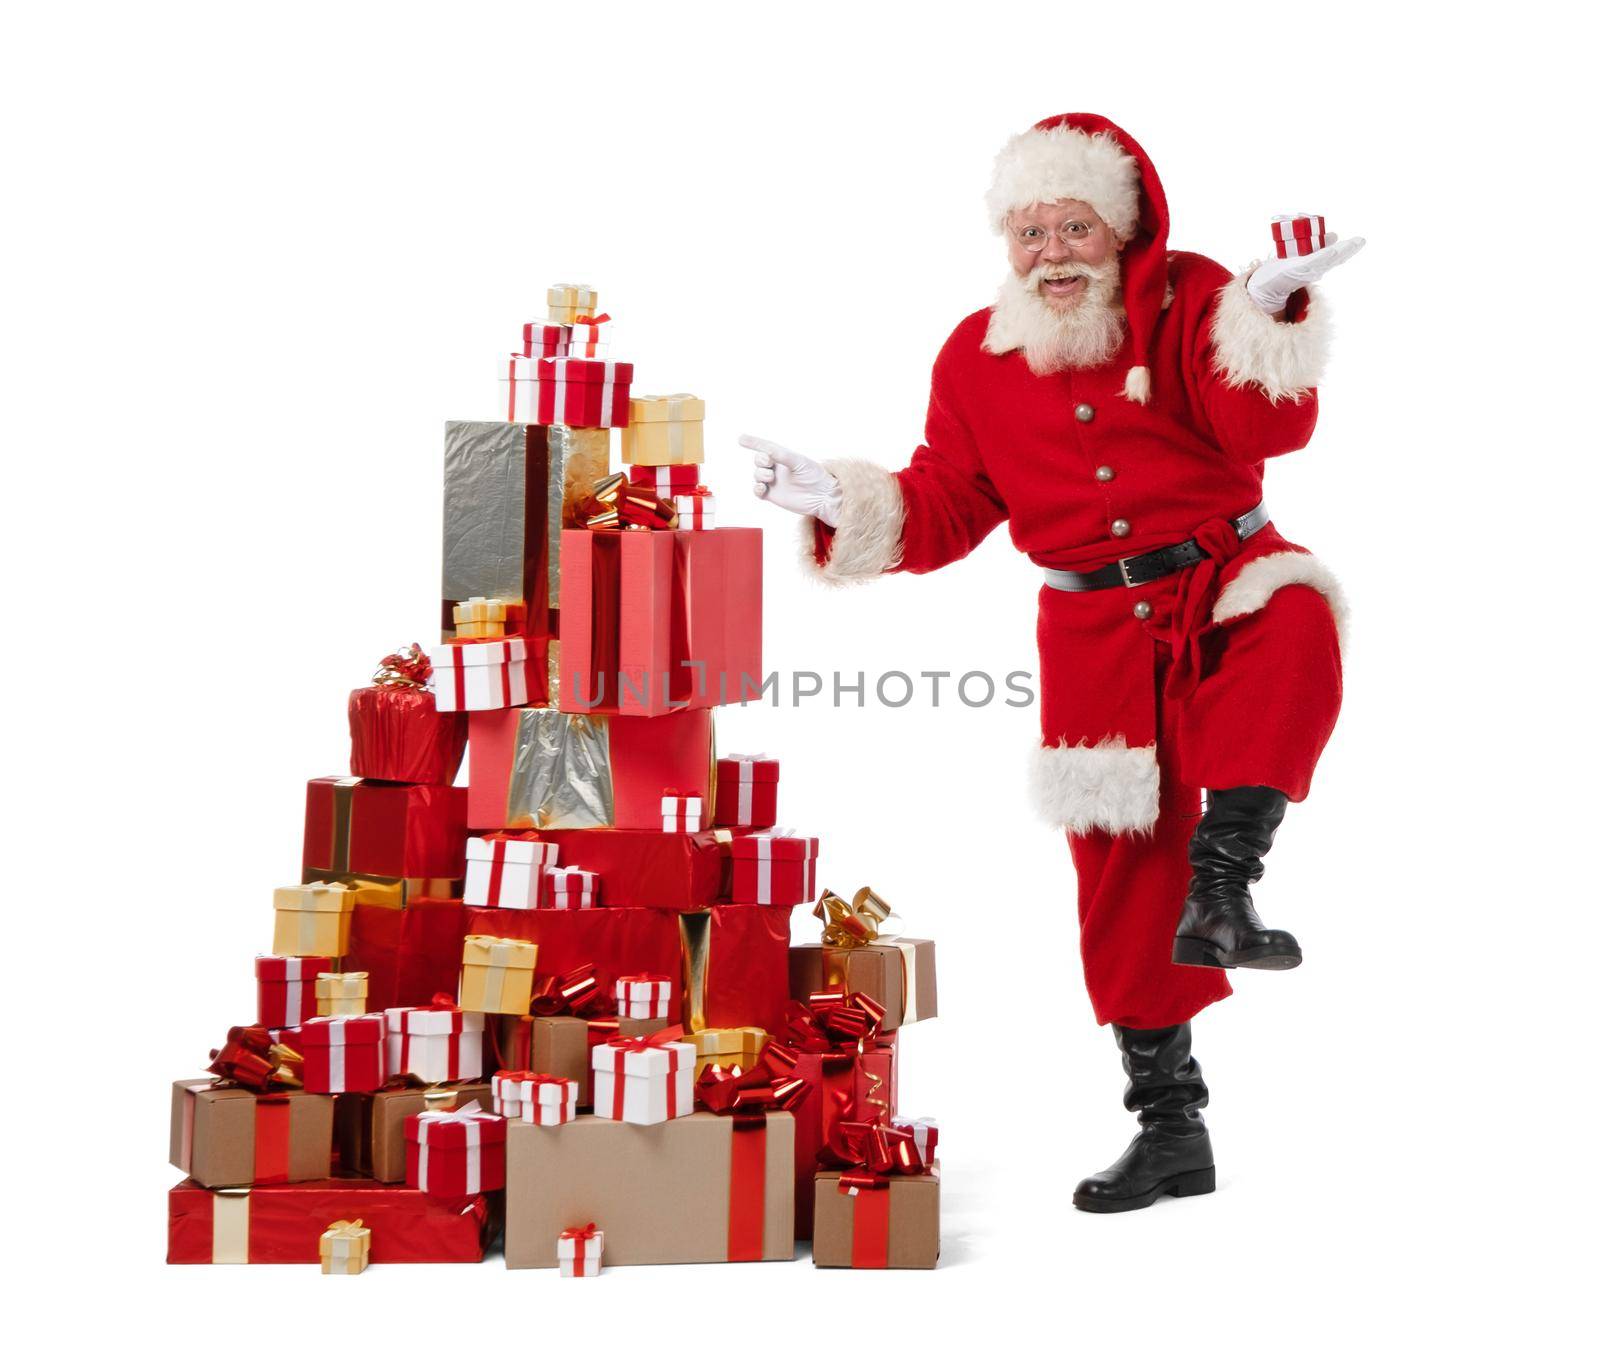 Santa Claus dancing near large pile of Christmas gifts isolated on white background